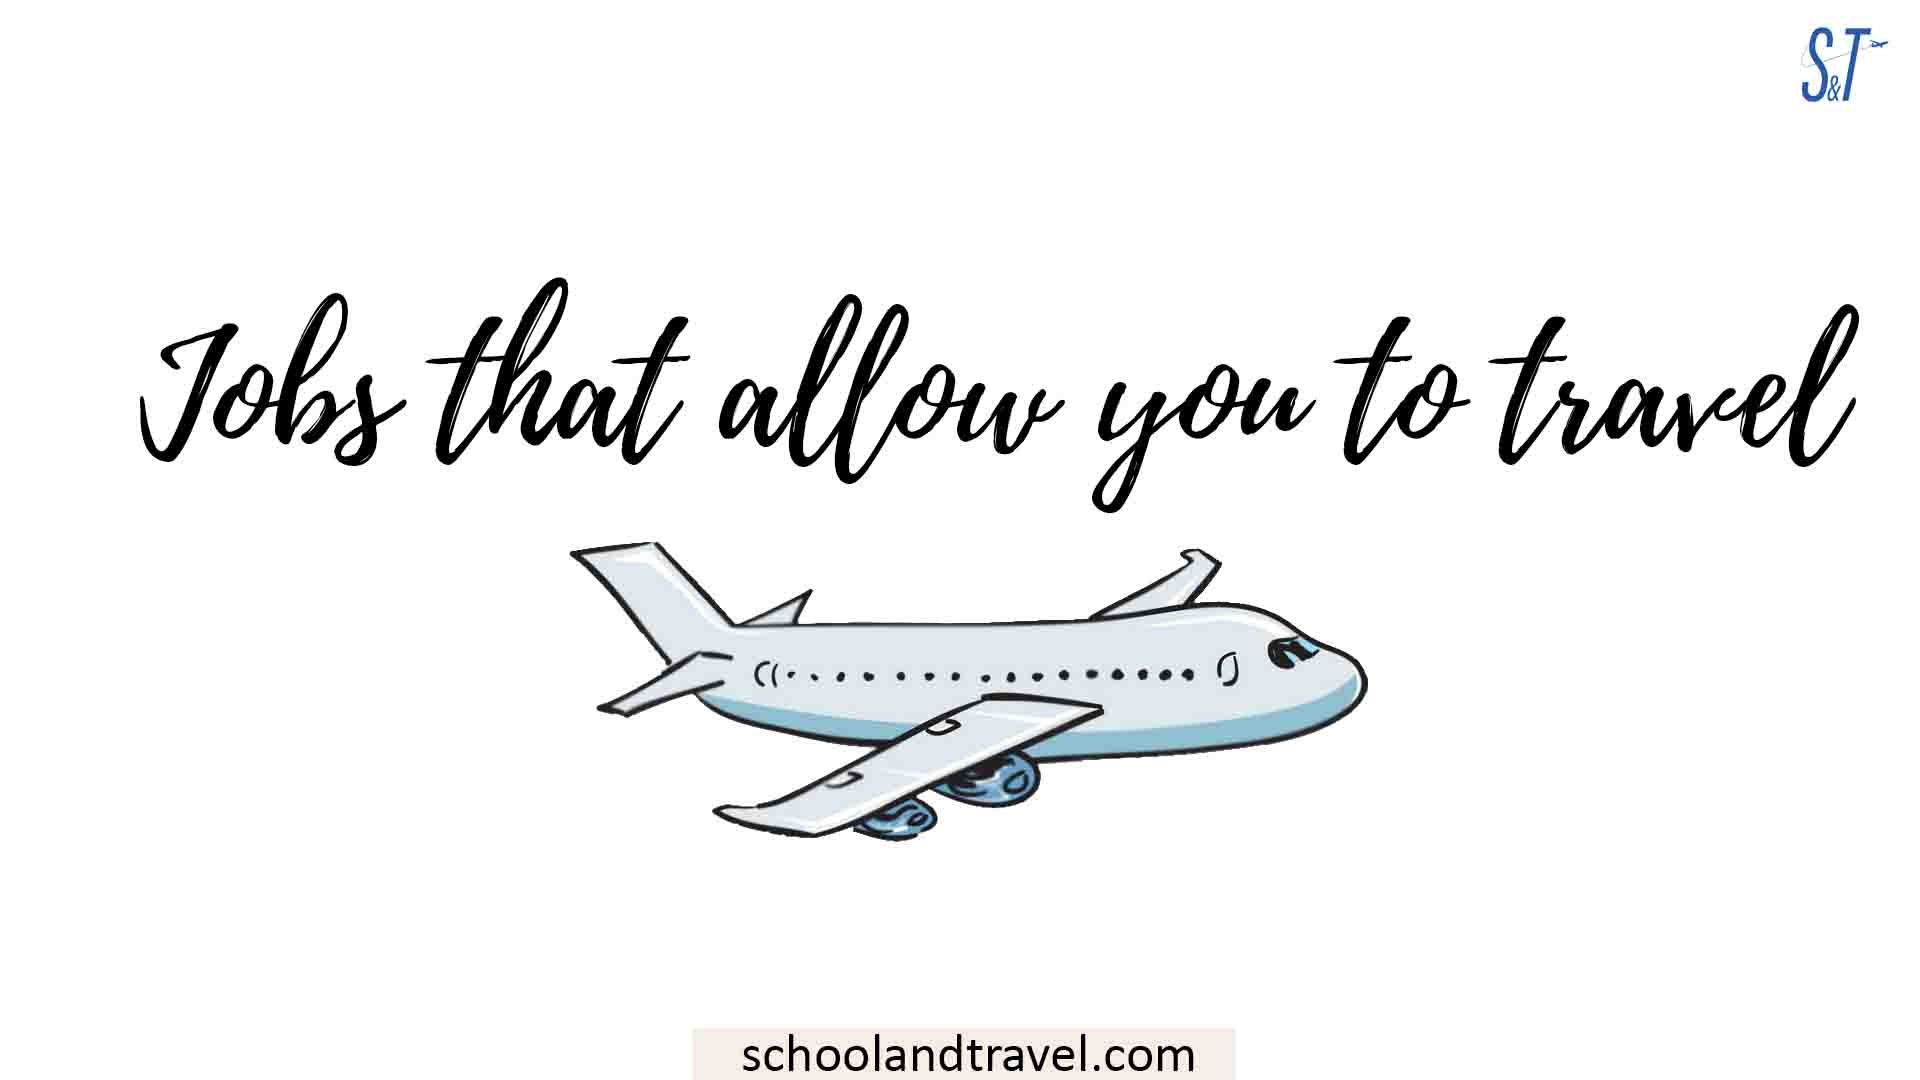 Jobs that allow you to travel